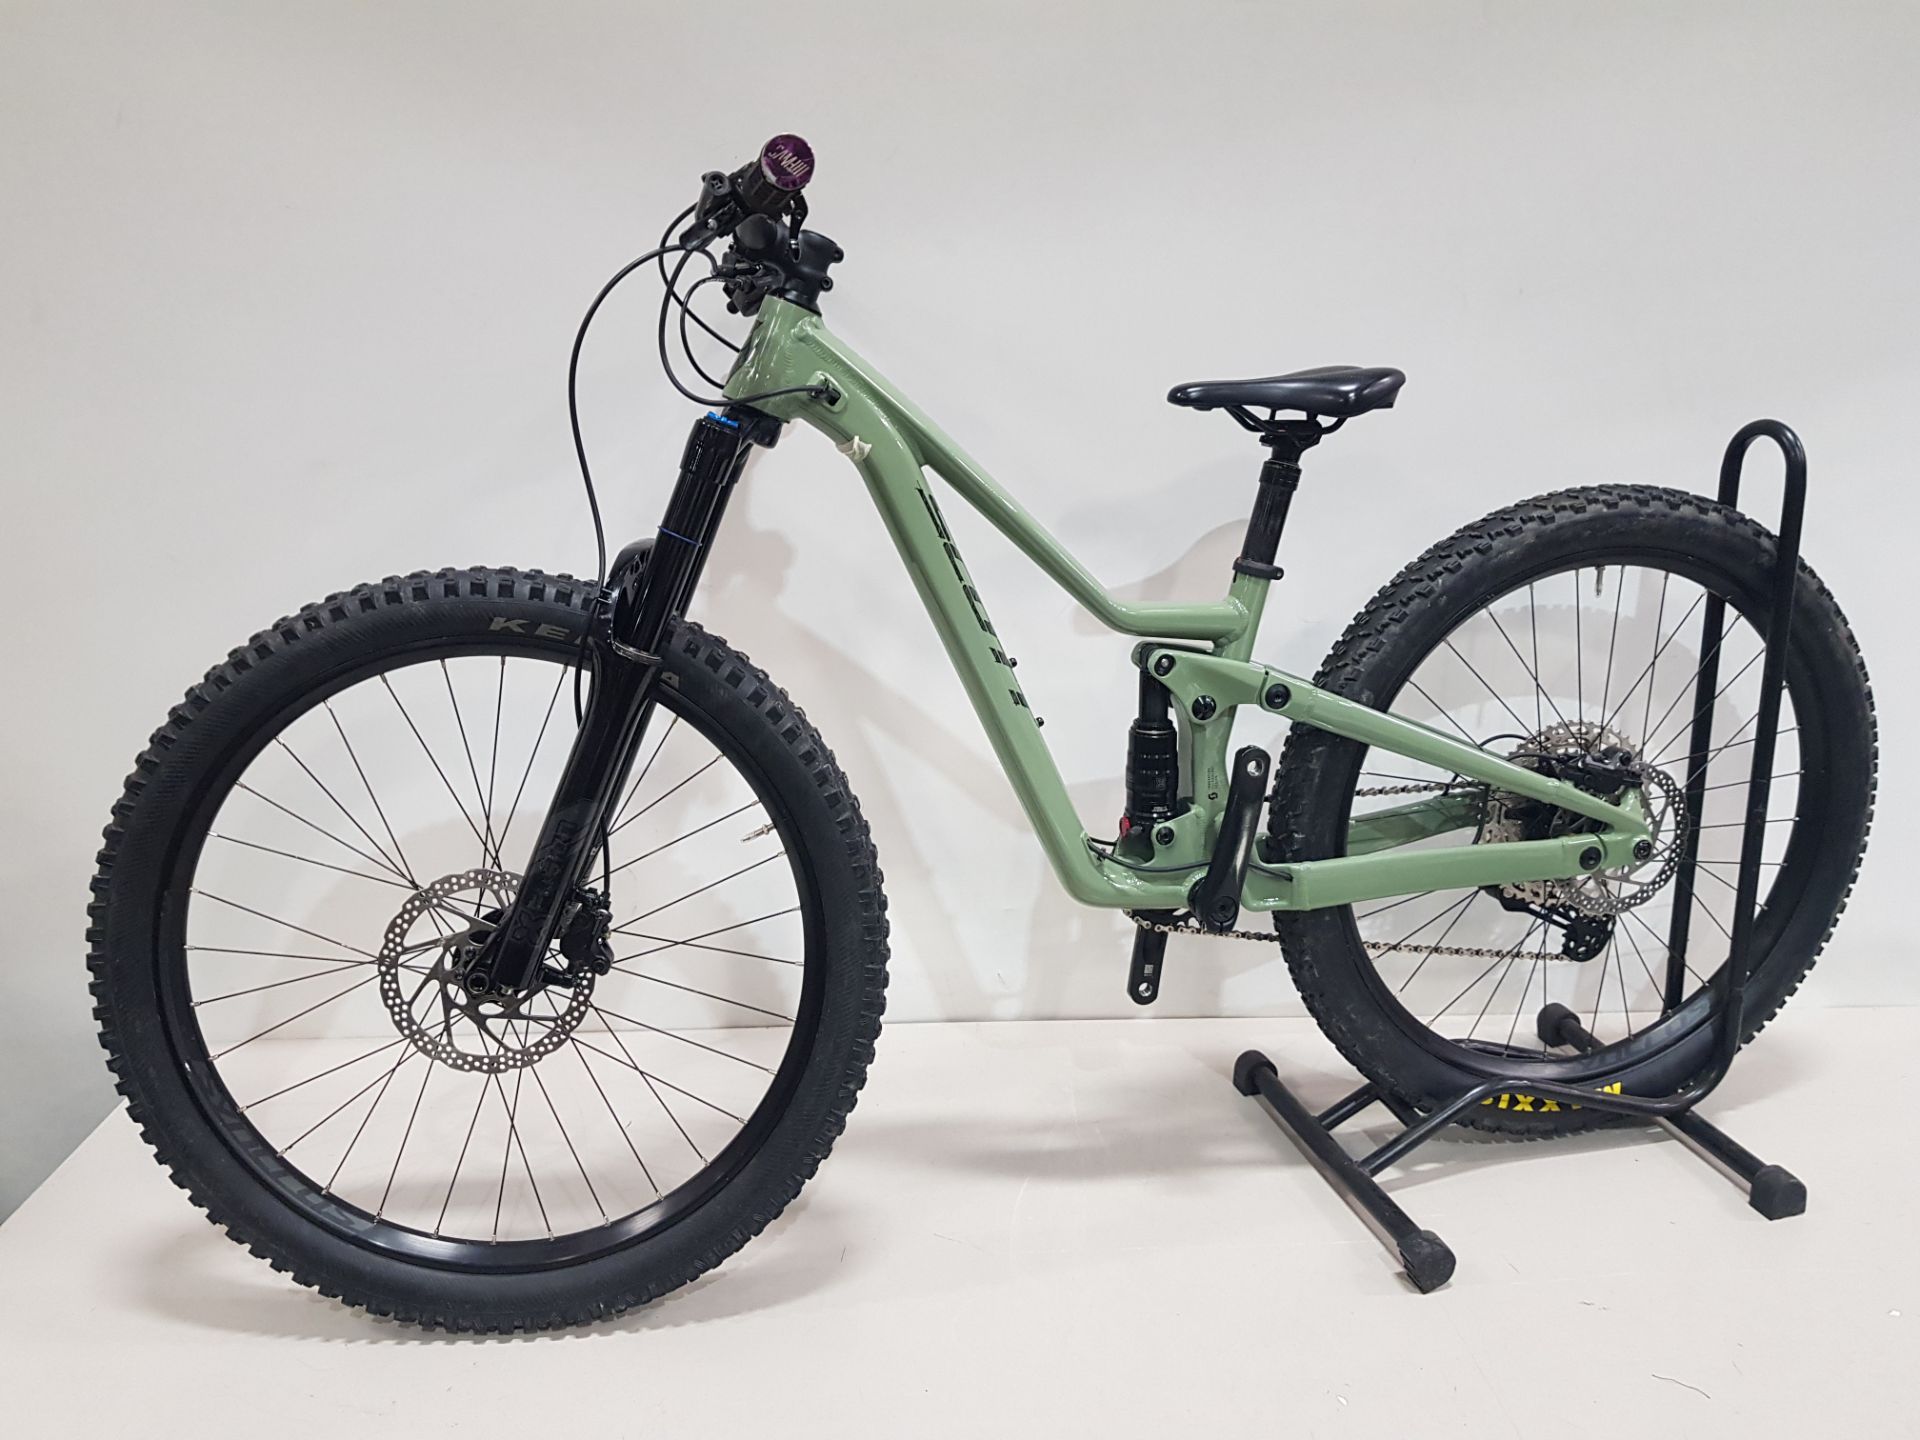 SCOTT RANSOM 286603.WITH 26 INCH WHEELS, A KID-TUNED LONG TRAVEL FORK (140MM) AND SHOCK (130MM) IN